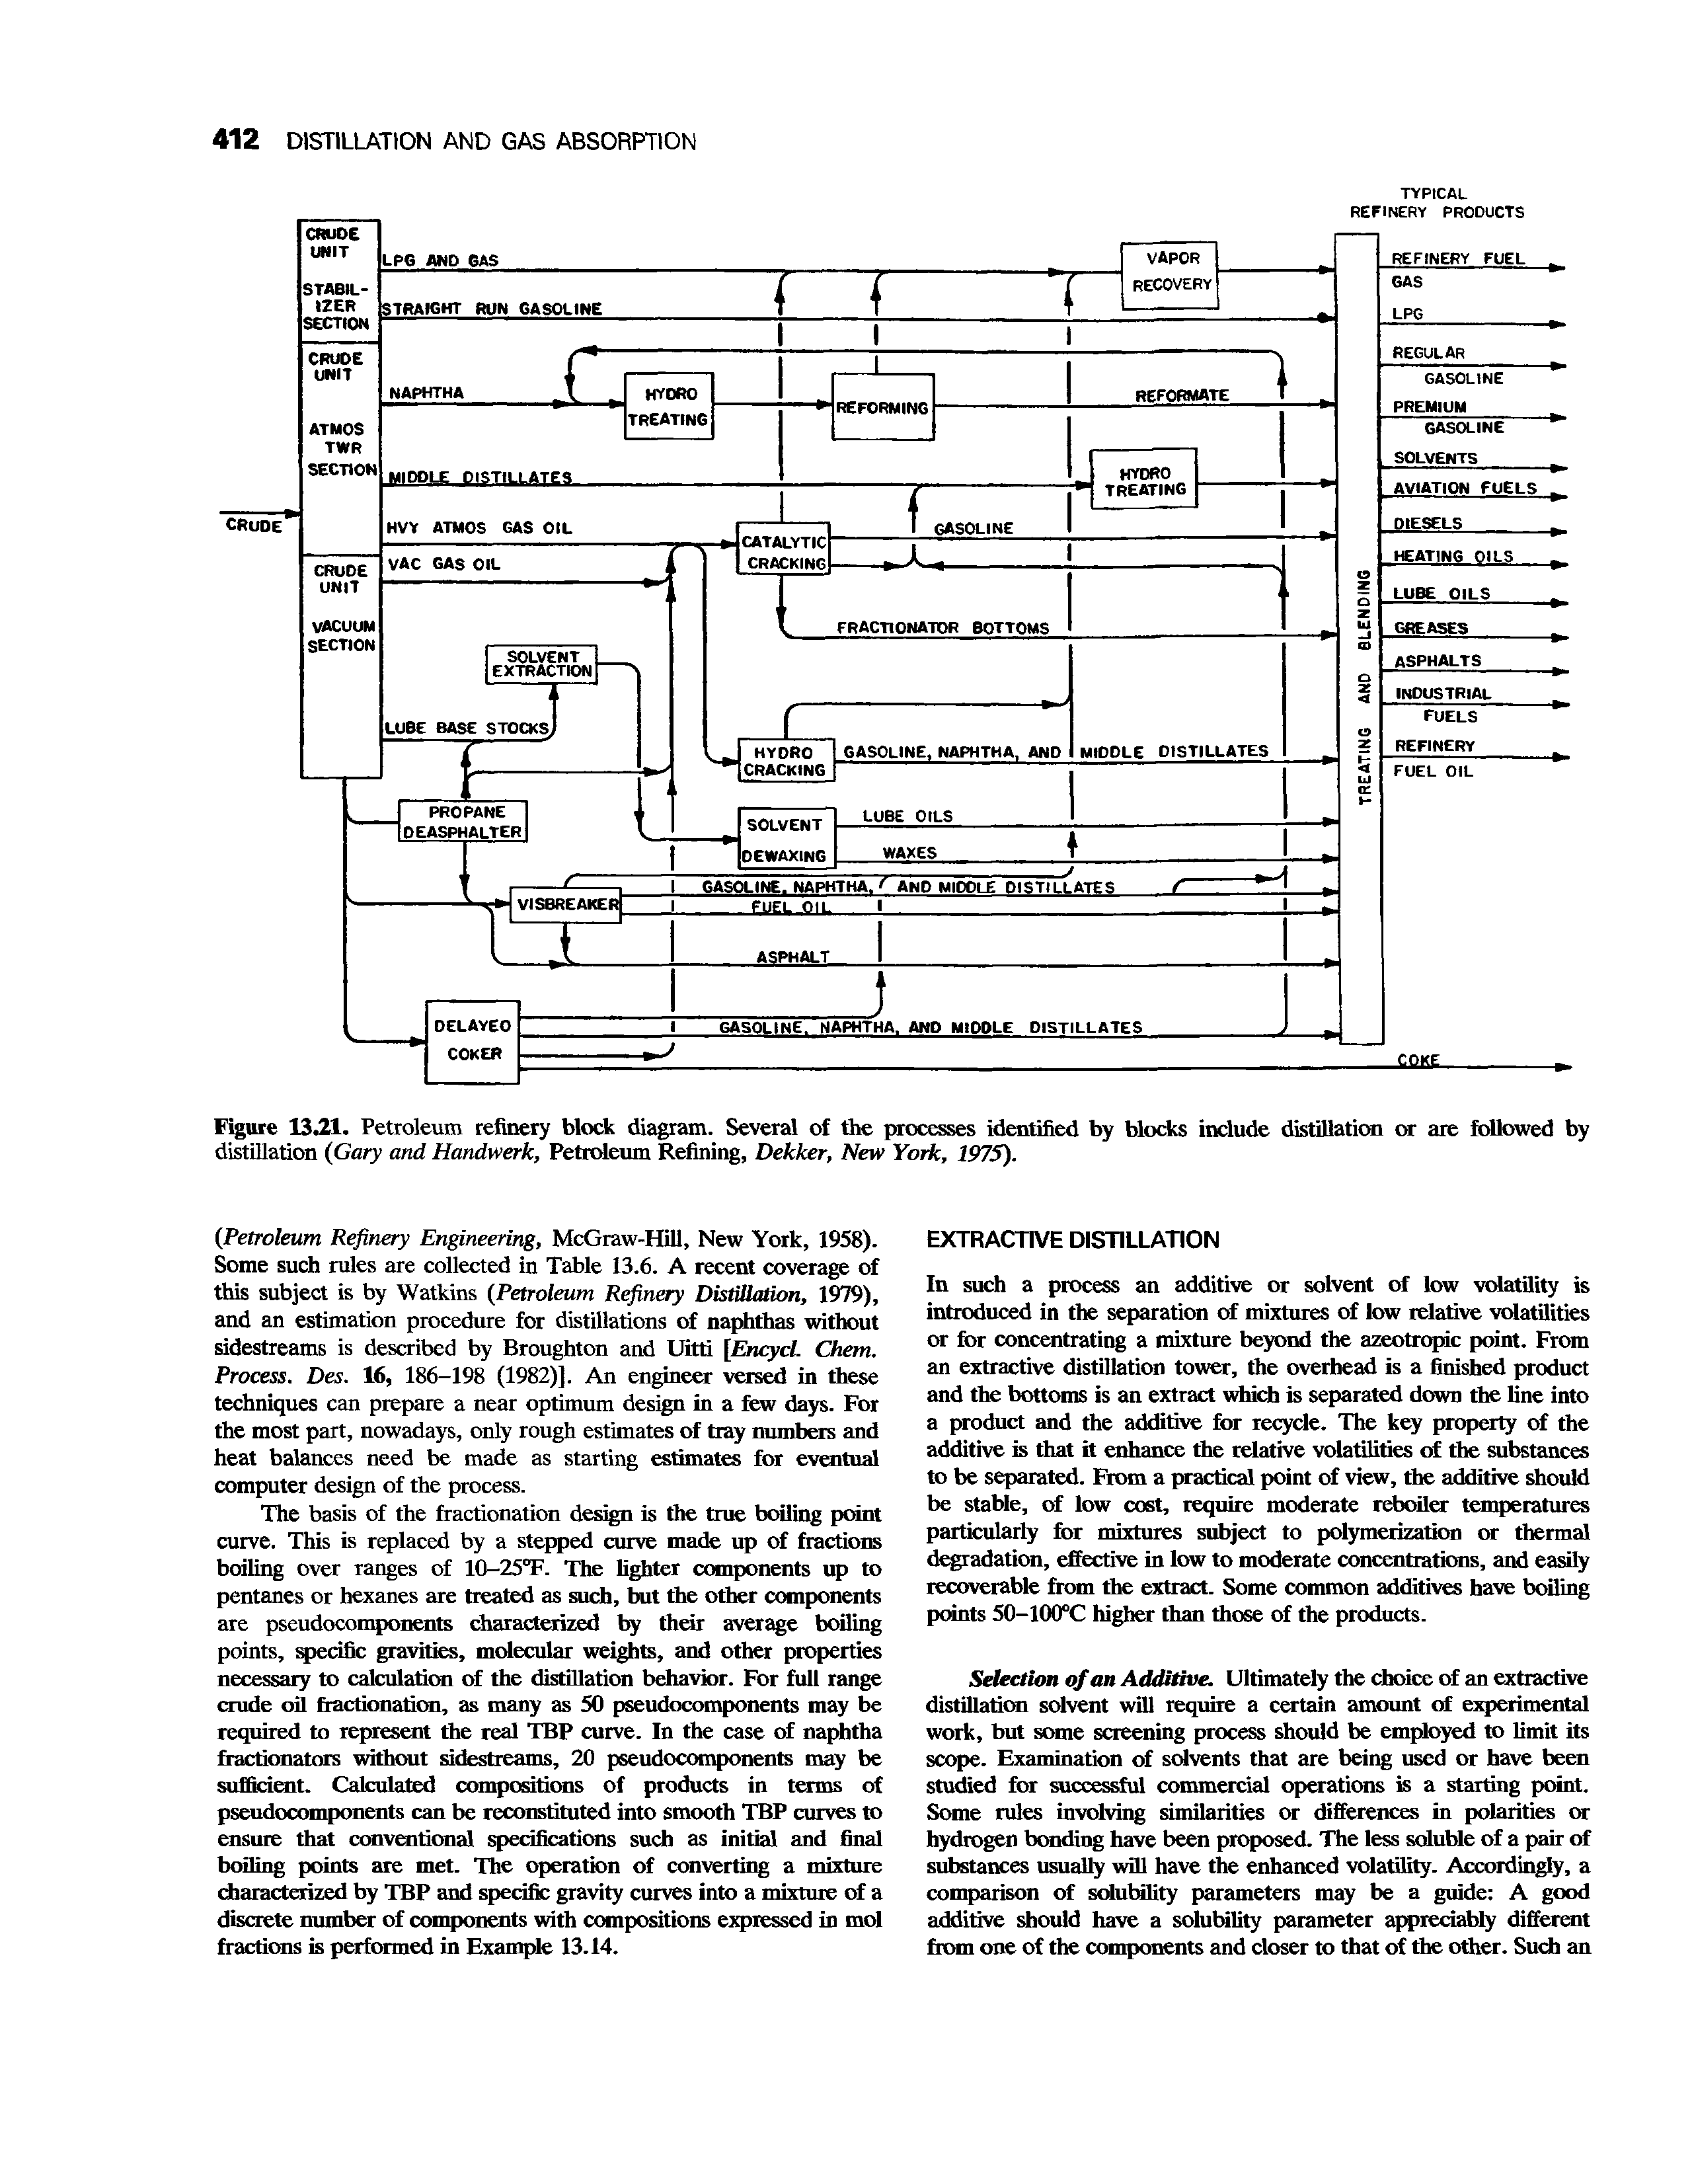 Figure 13.21. Petroleum refinery block diagram. Several of the processes identified by blocks include distillation or are followed by distillation (Gary and Handwerk, Petroleum Refining, Dekker, New York, 1975).